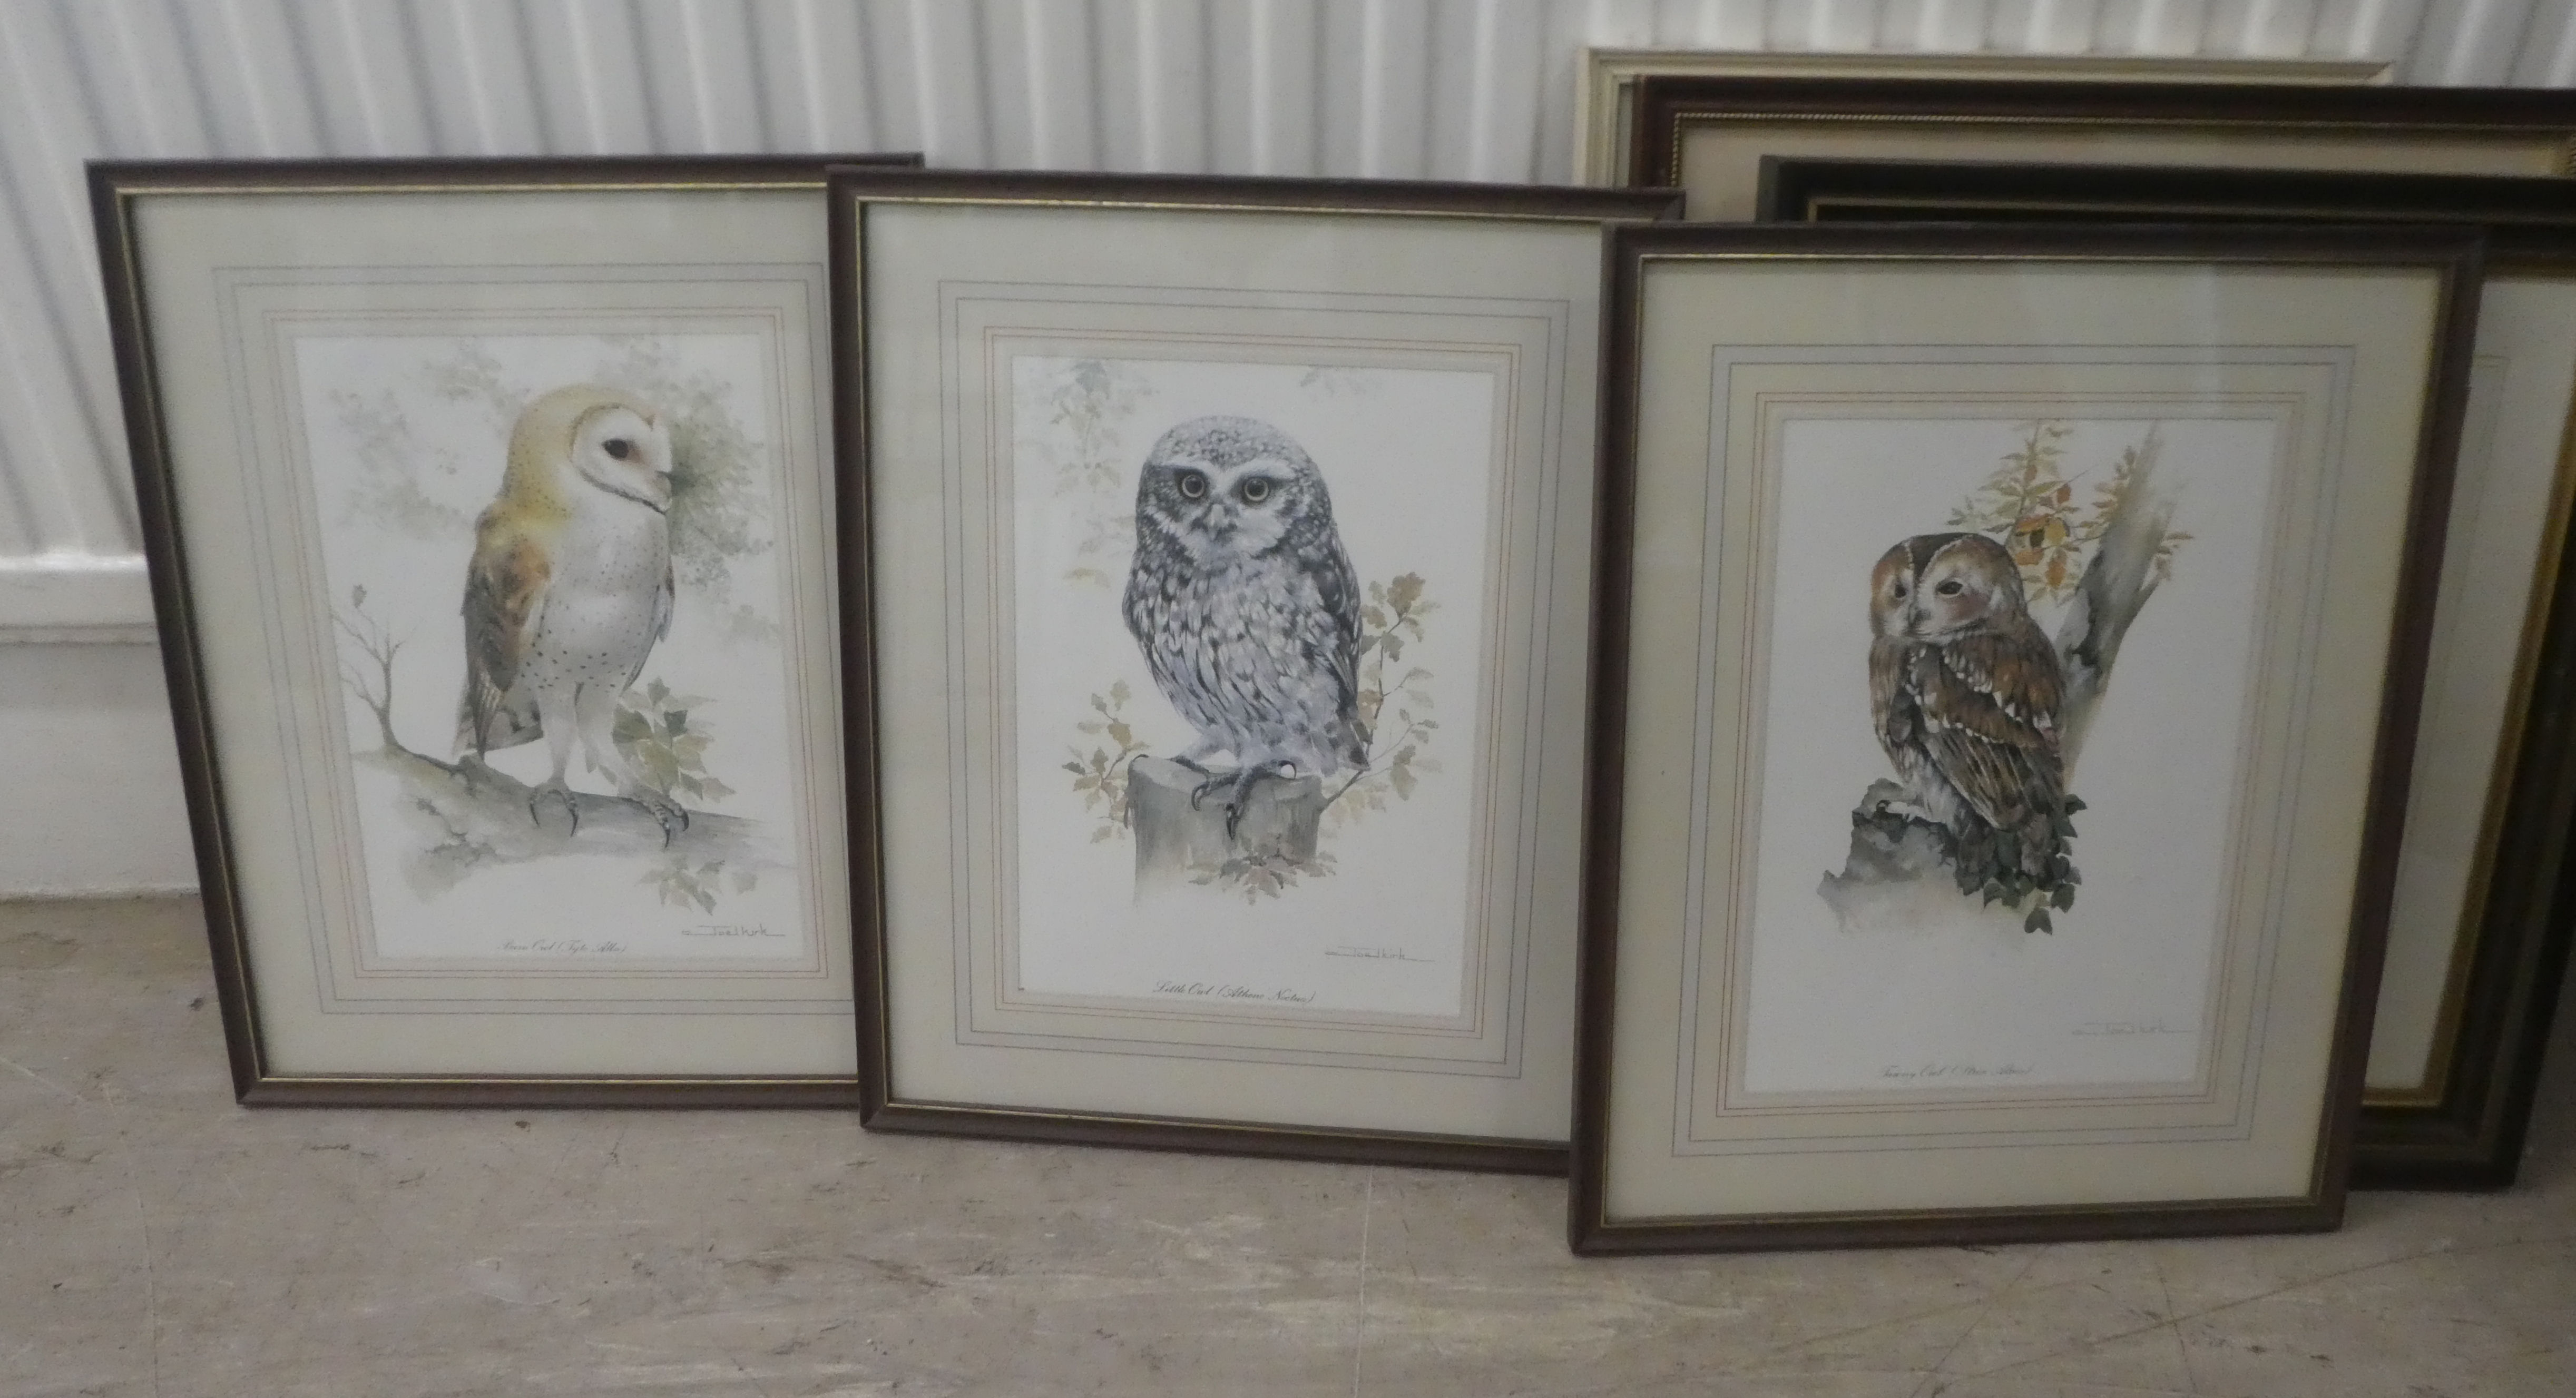 Framed pictures and prints: to include after Joel Kirk - 'Owls'  print  7" x 9" - Image 5 of 5